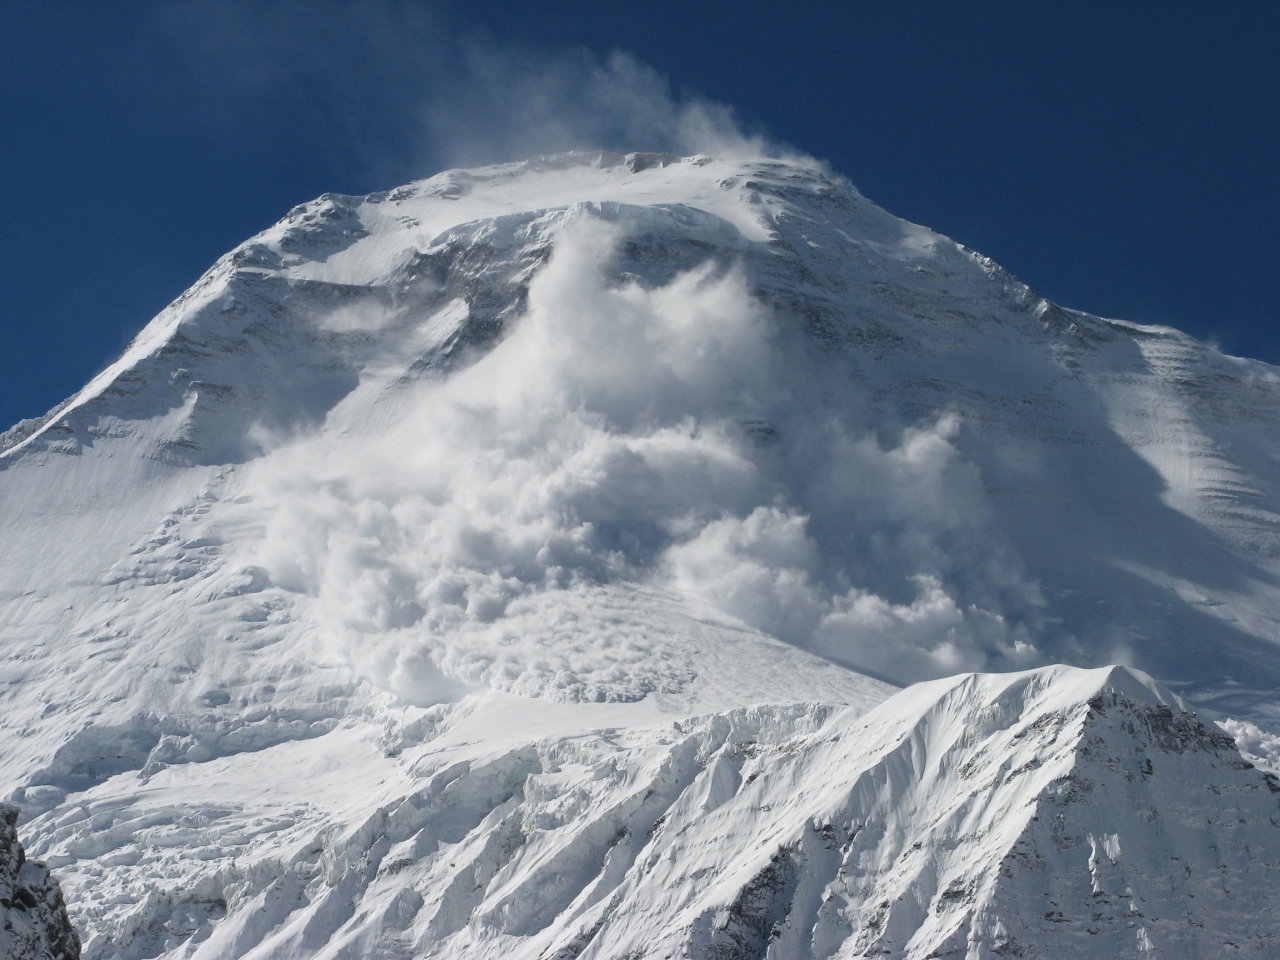 At least 4 dead in avalanche on Ecuador's volcano